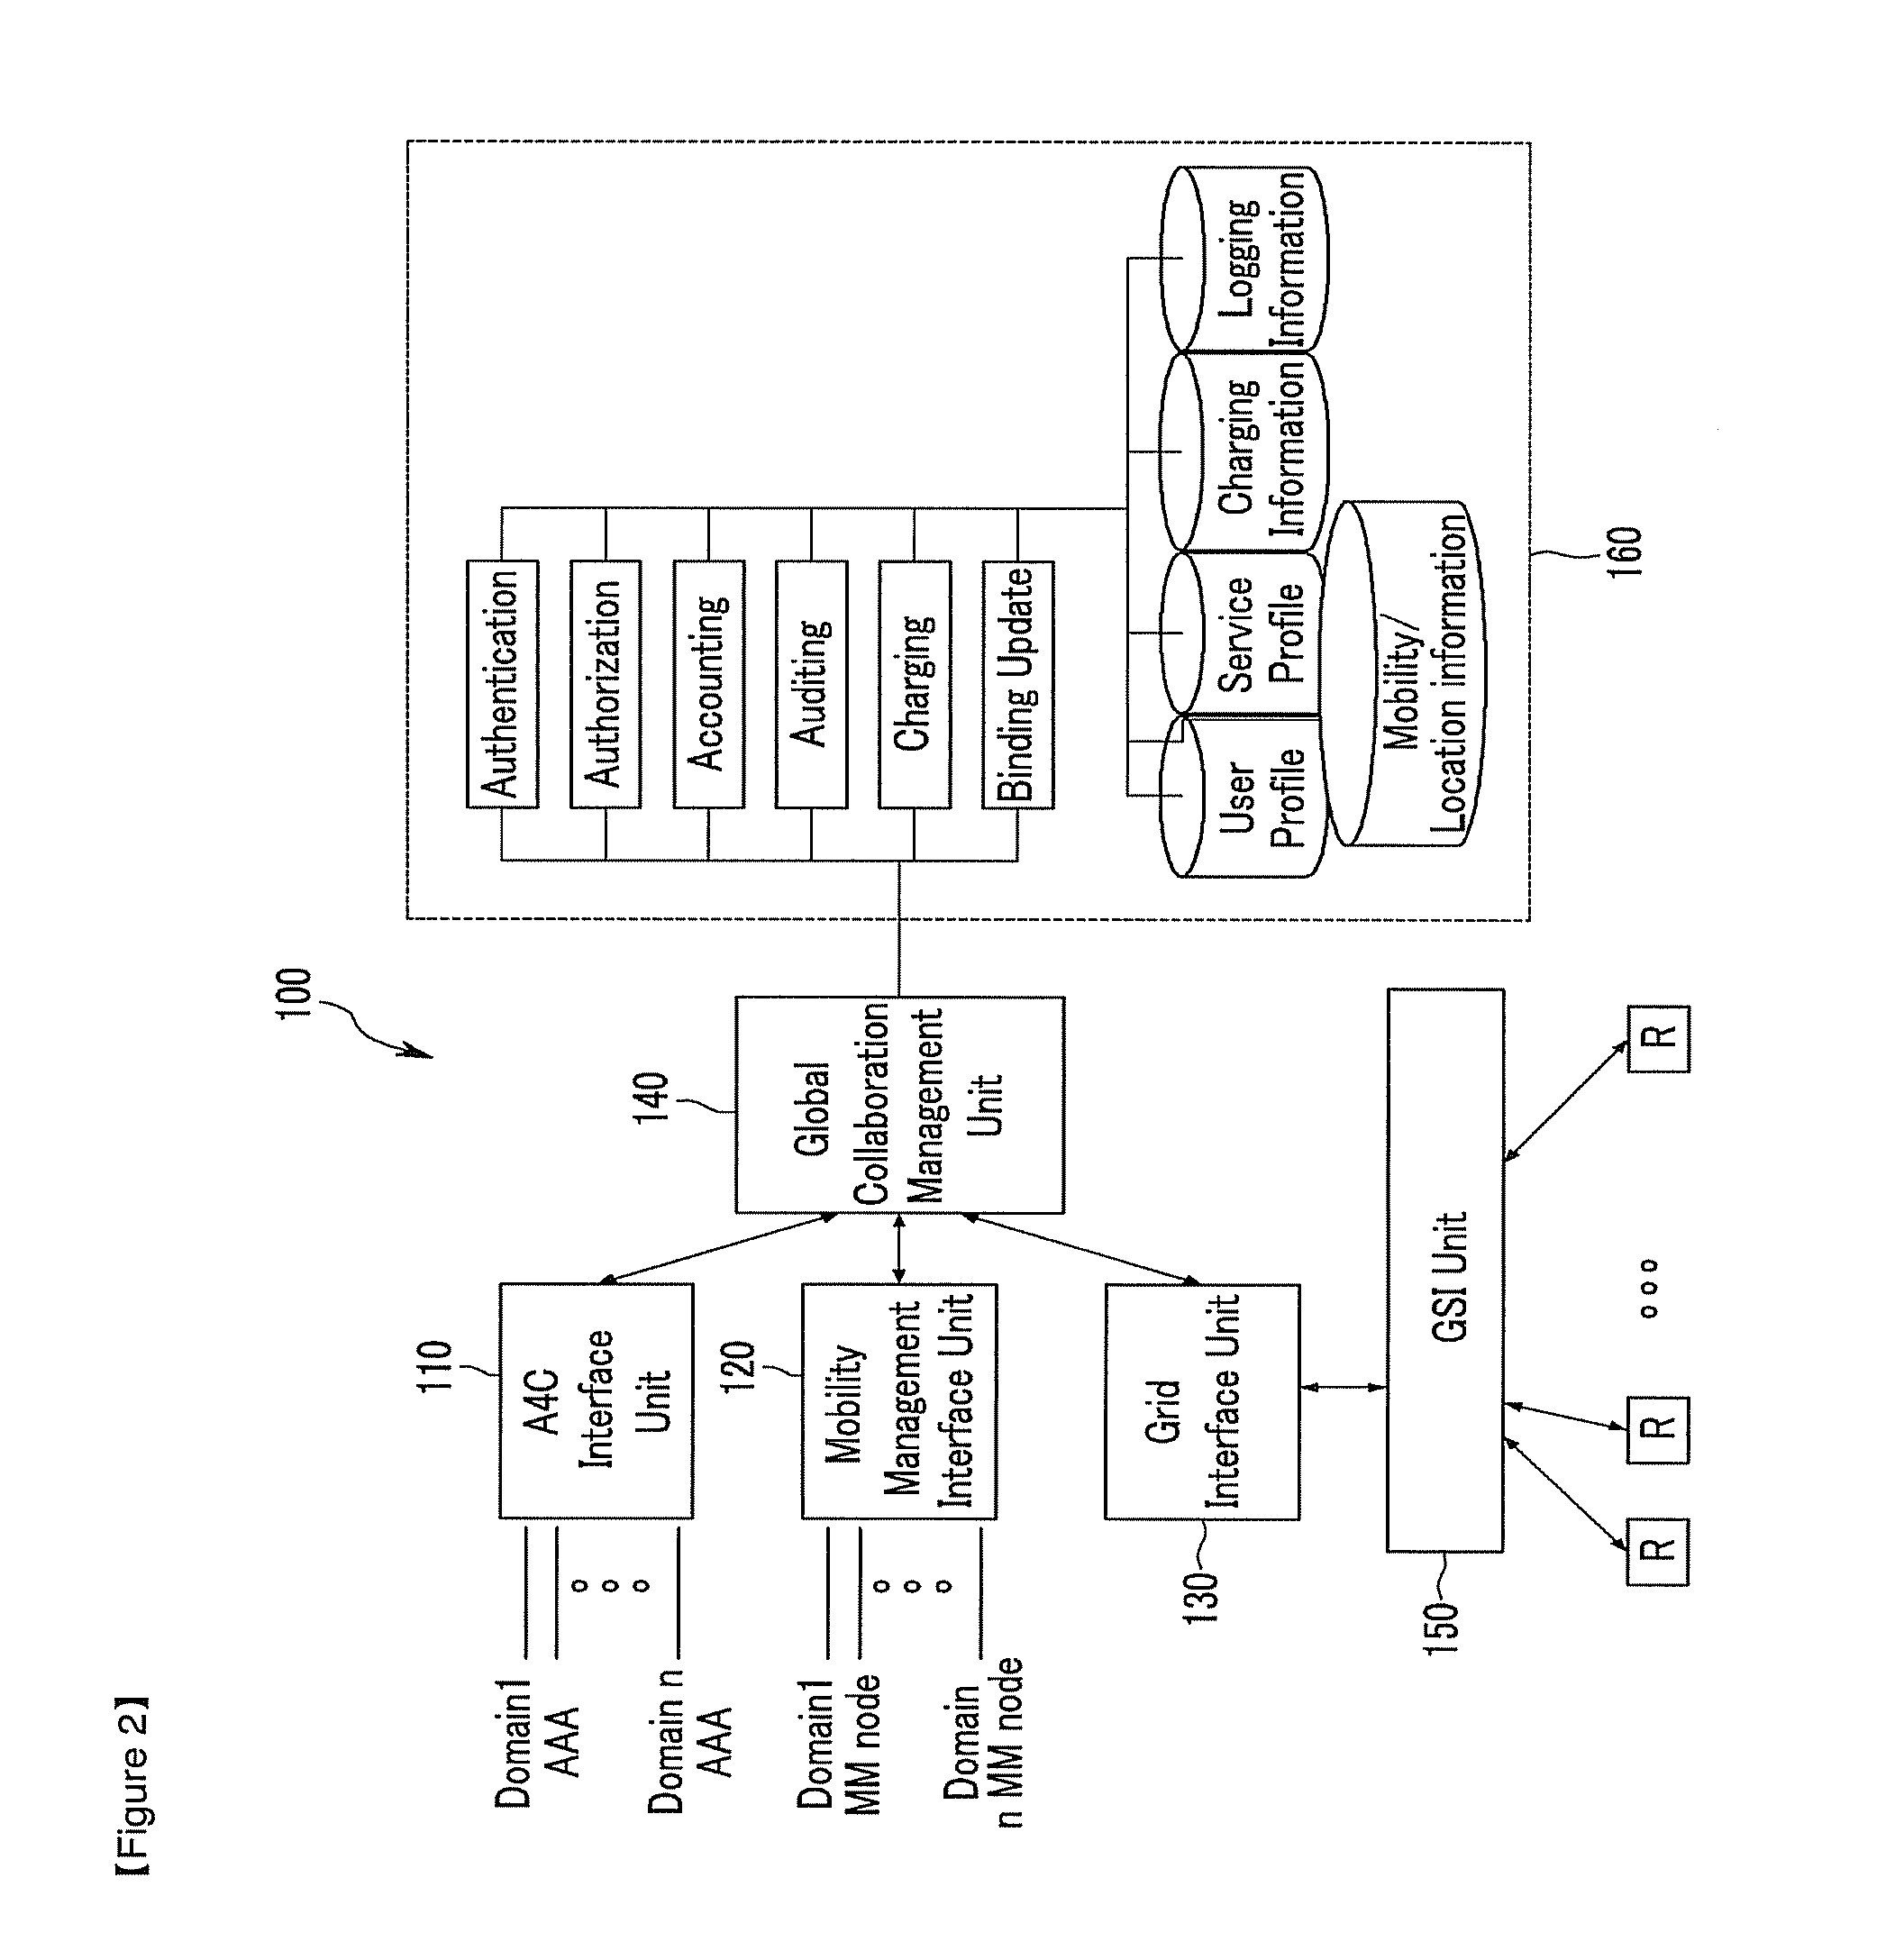 Collaboration system and method among heterogeneous nomadic and mobile communication networks using grid services